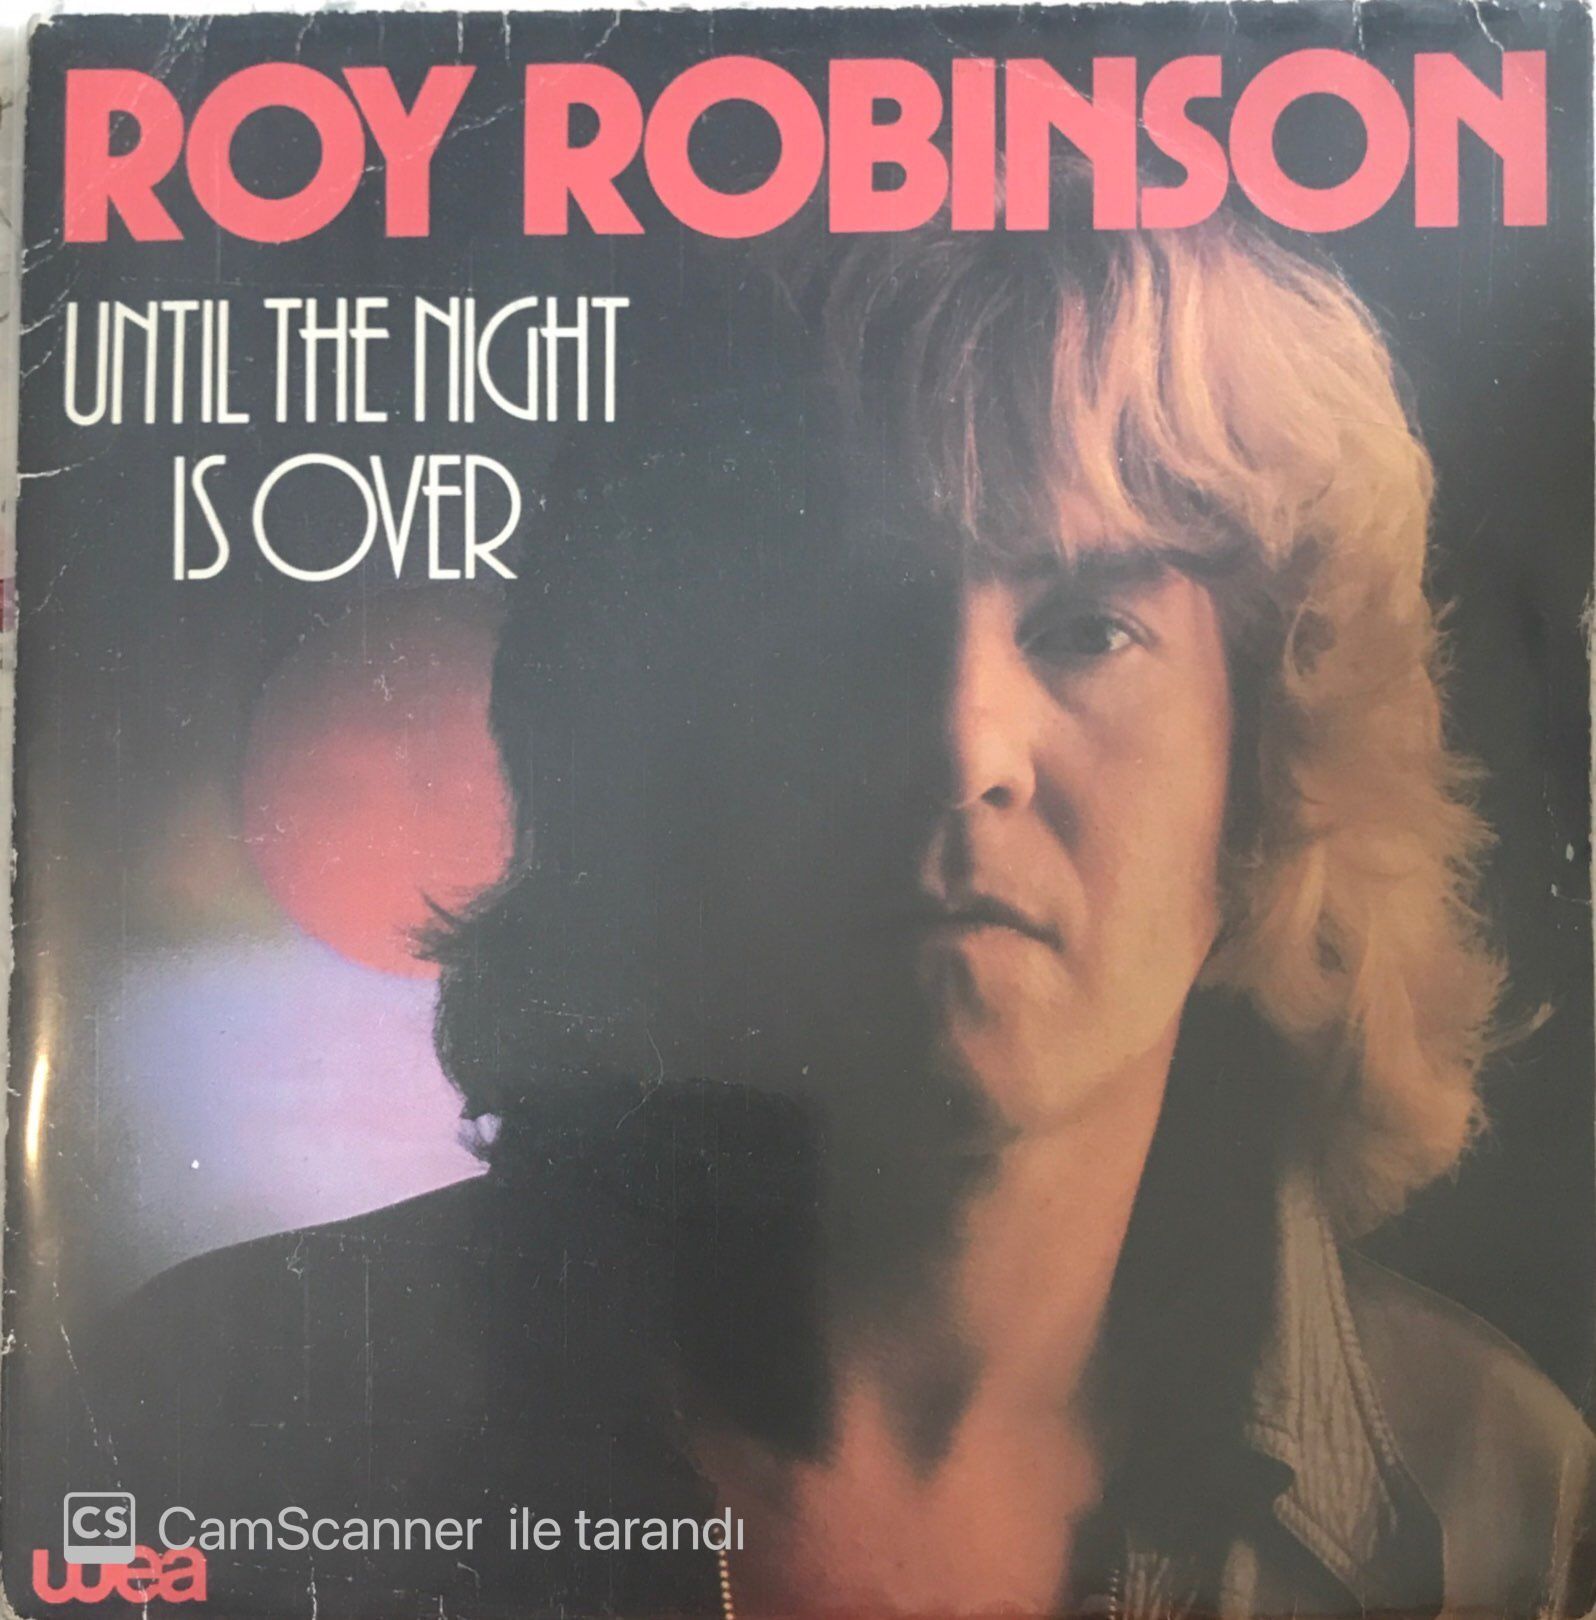 Roy Robinson - Until The Night Is Over 45lik